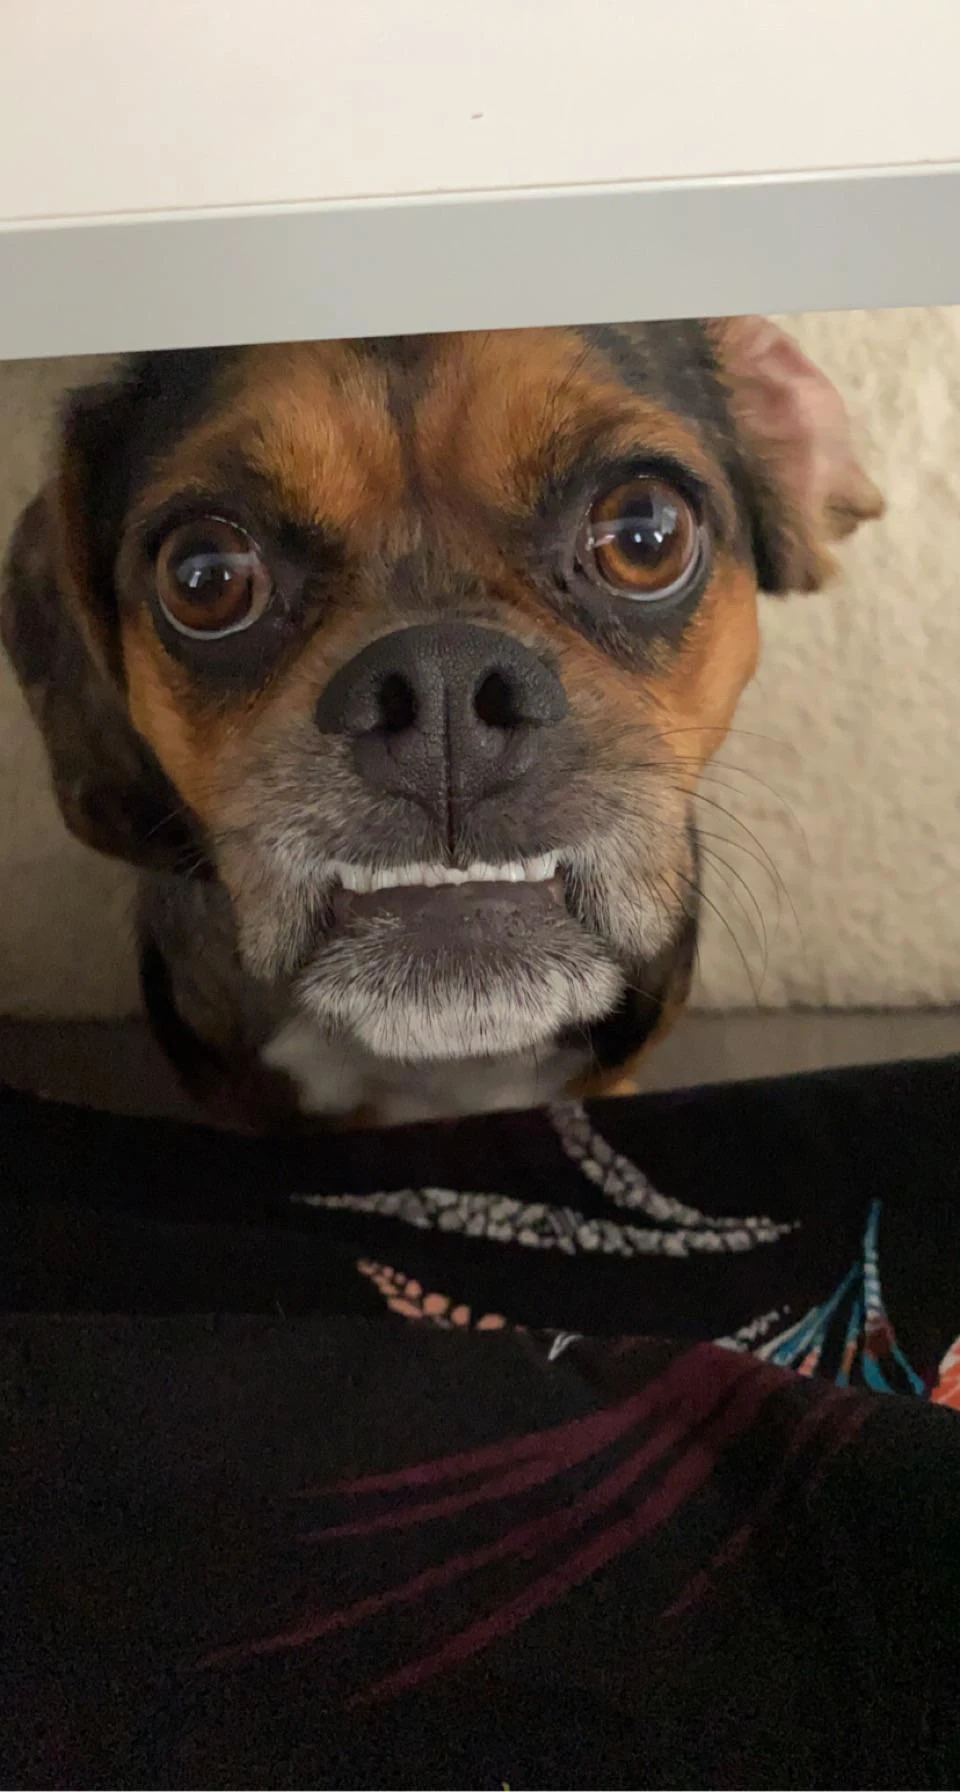 Celebrating my cake day with my goober Bonnie and her underbite 😬